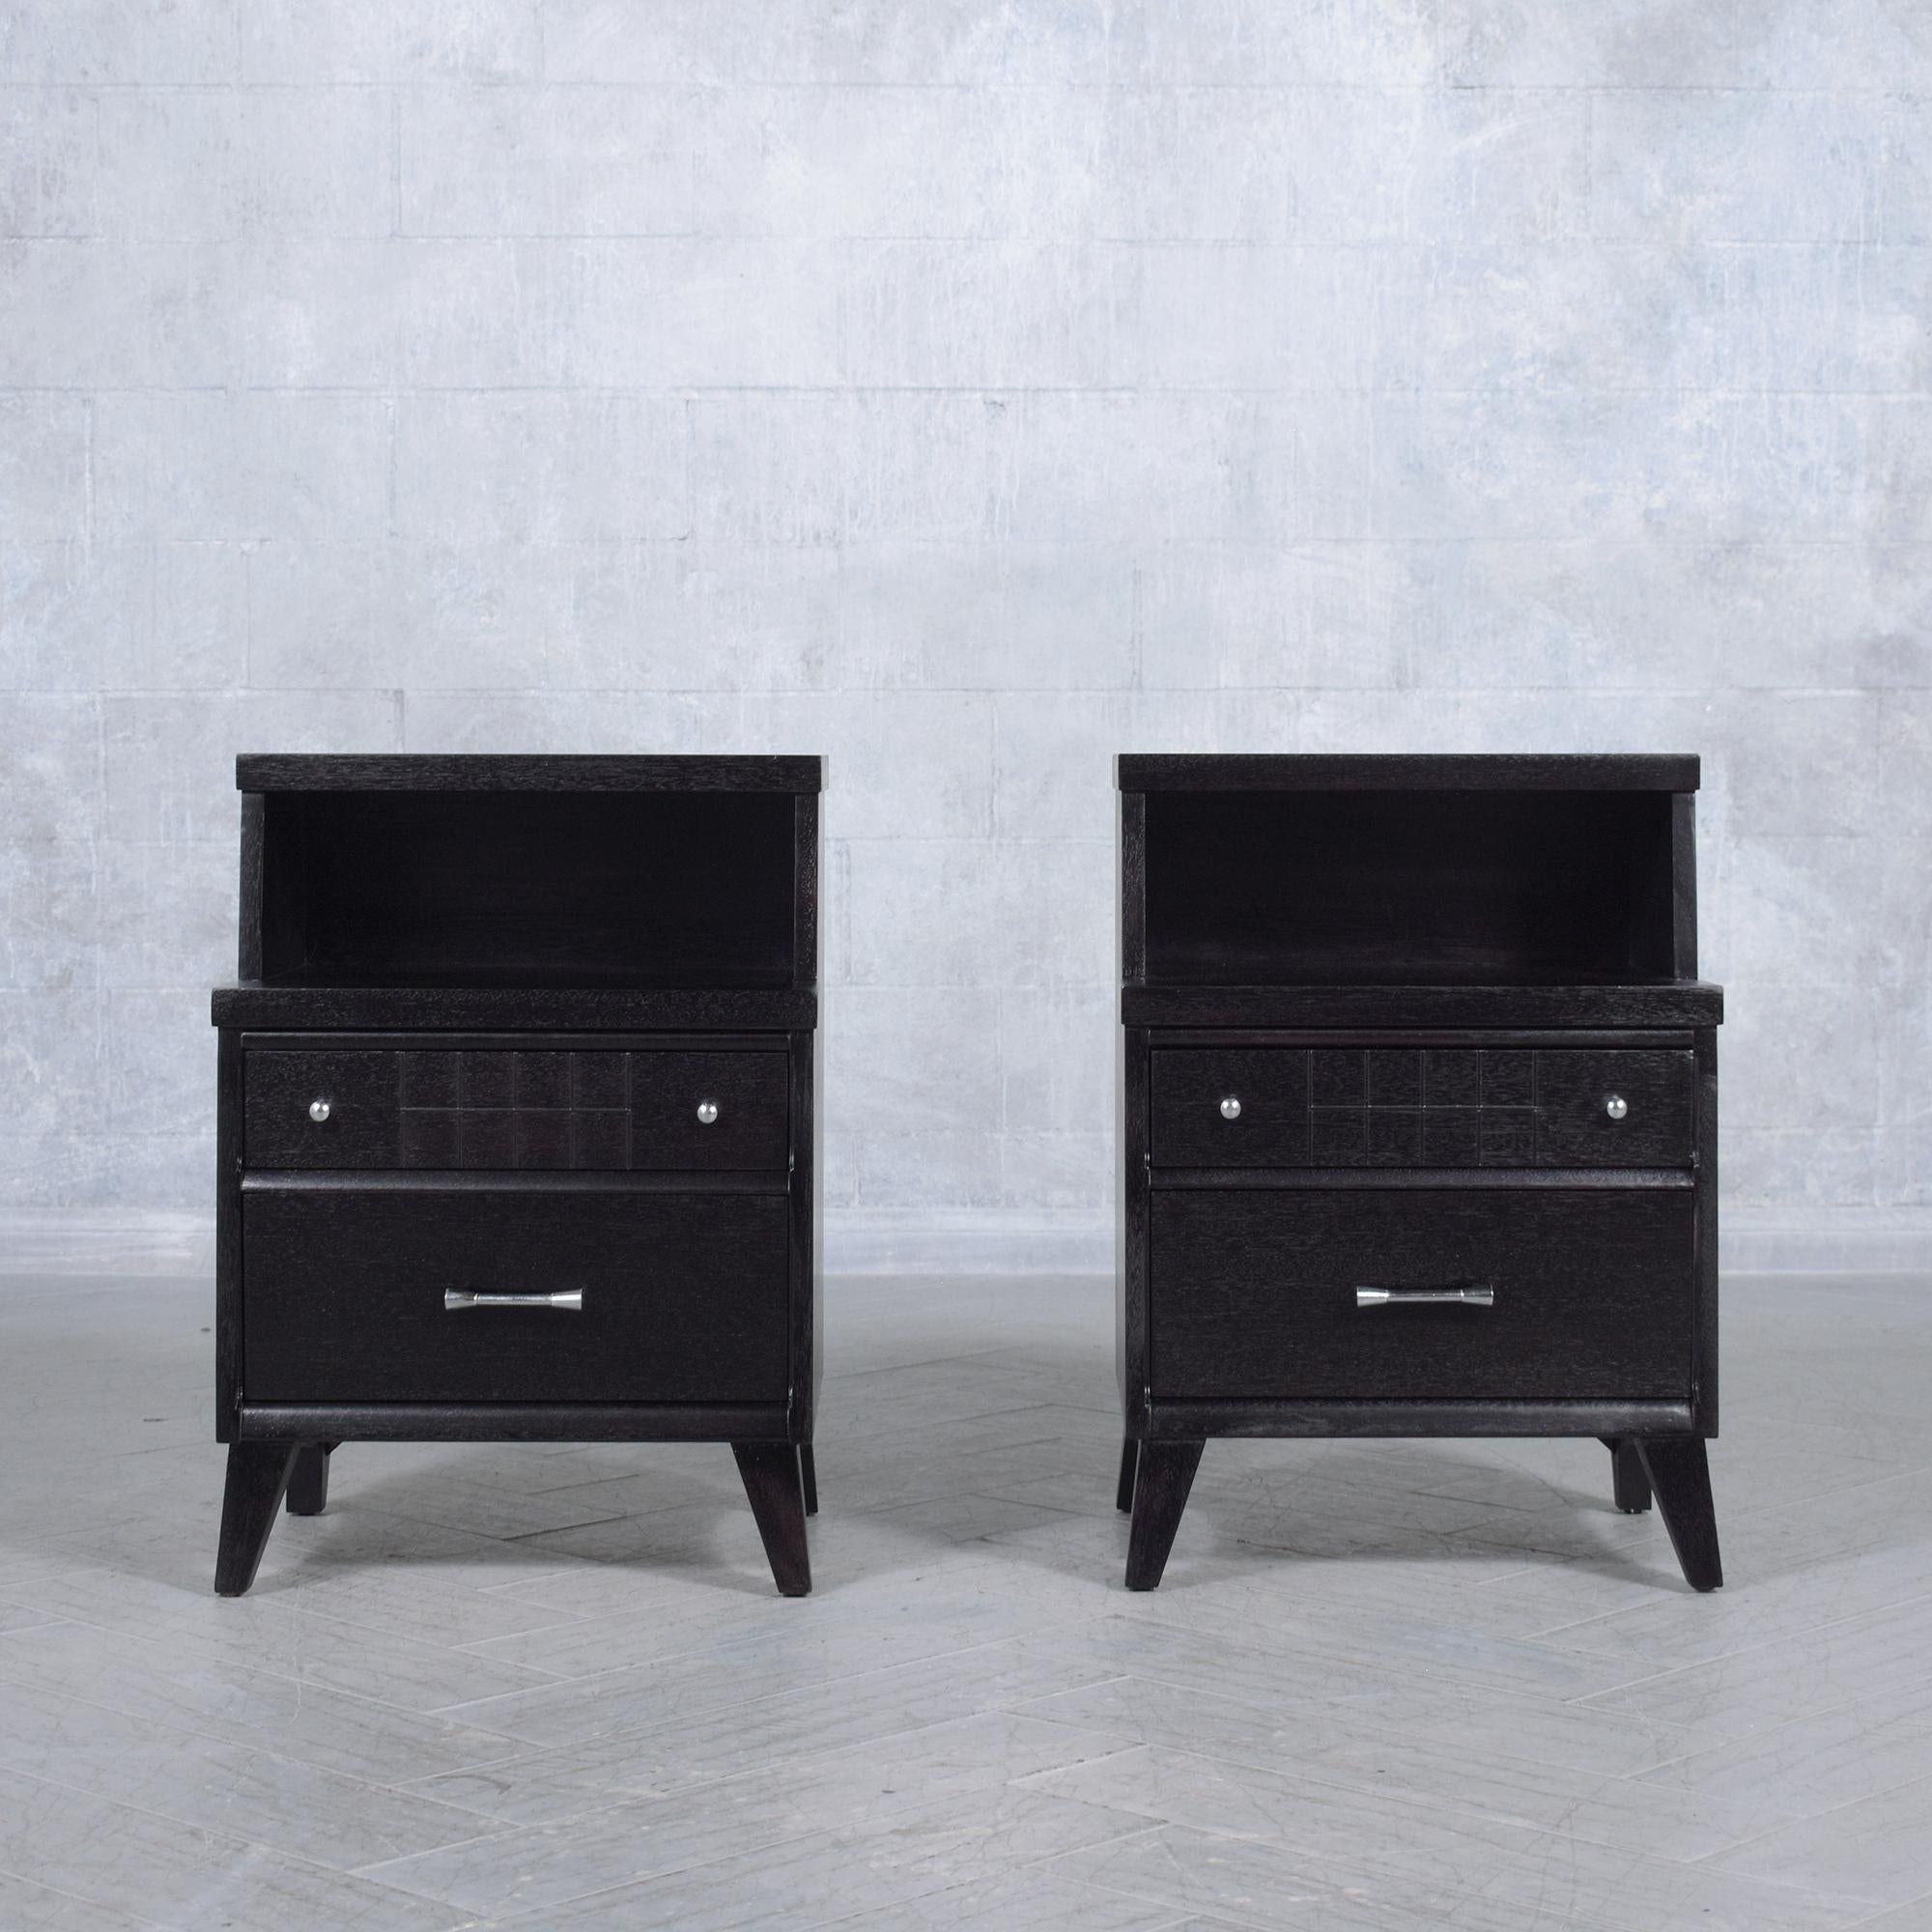 Carved Restored Mid-Century Modern Nightstands with Ebonized Finish and Chrome Hardware For Sale